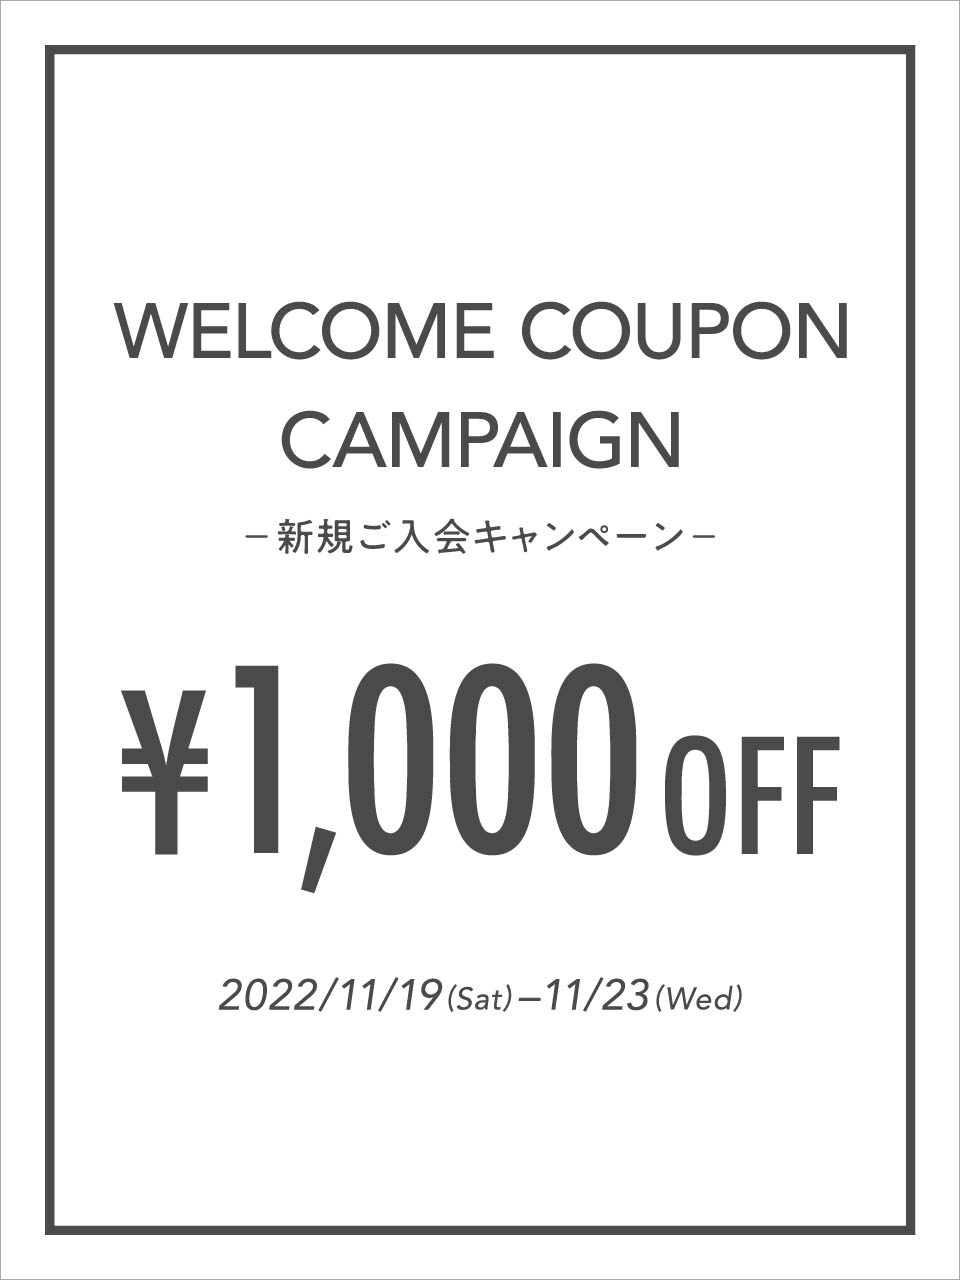 -WELCOME COUPON CAMPAIGN- at IKEBUKURO PARCO